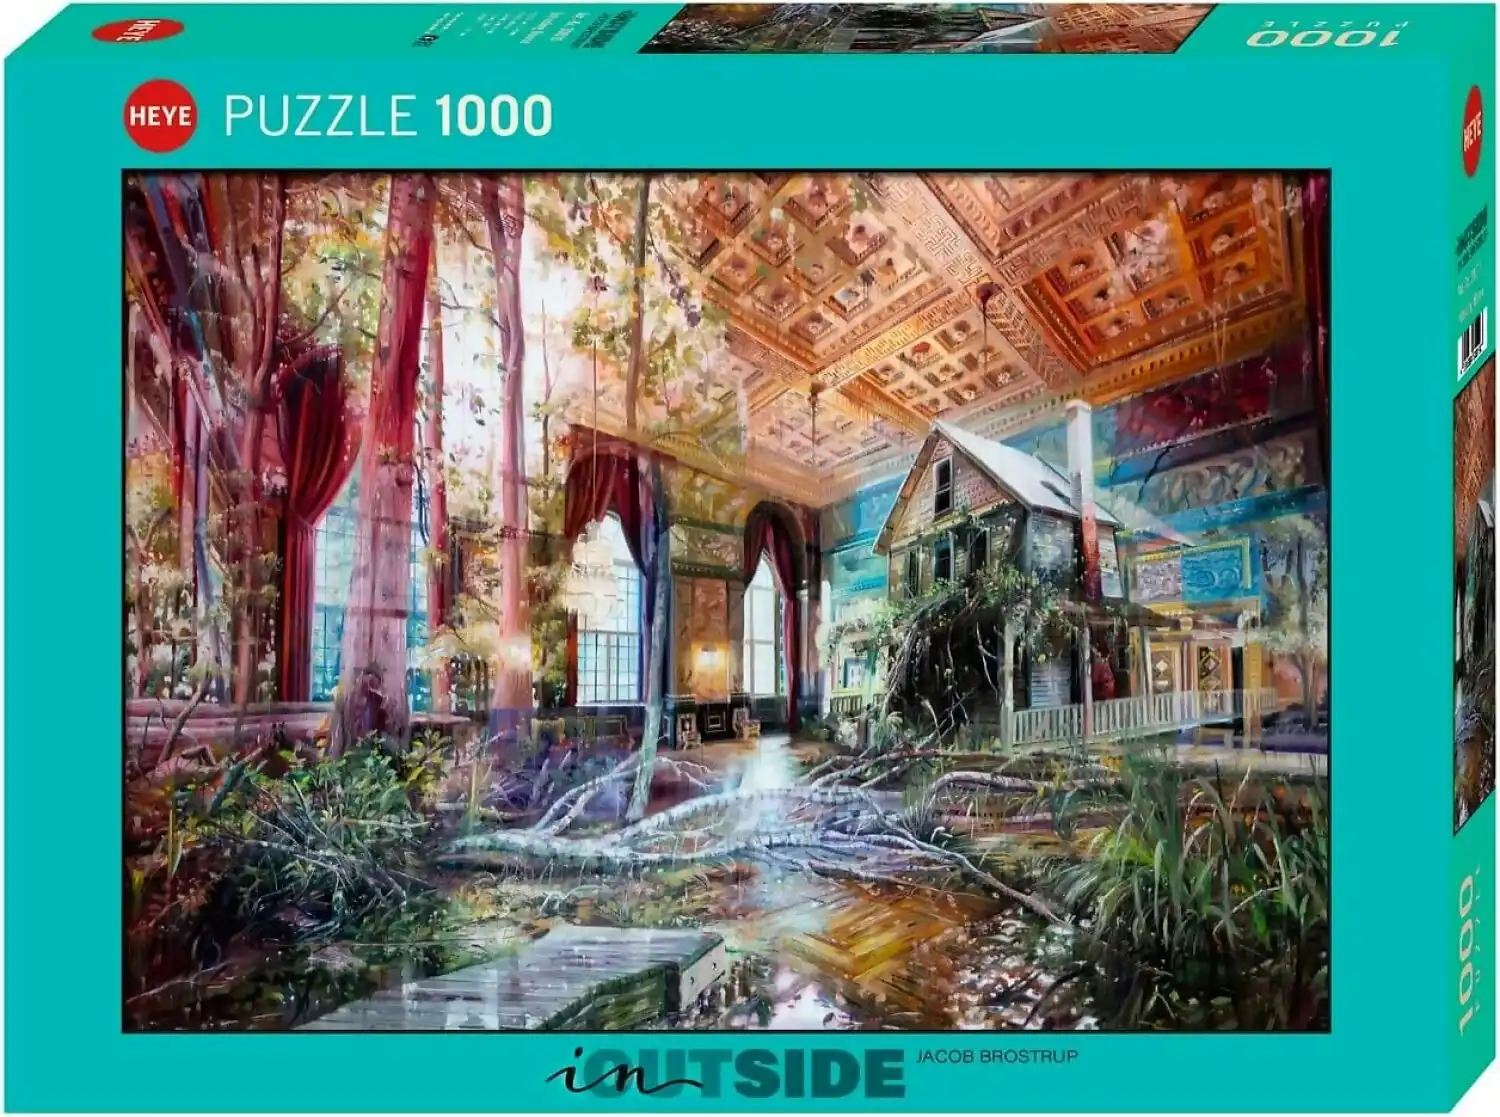 Heye - Intruding House In Outside - Jigsaw Puzzle 1000 Pieces